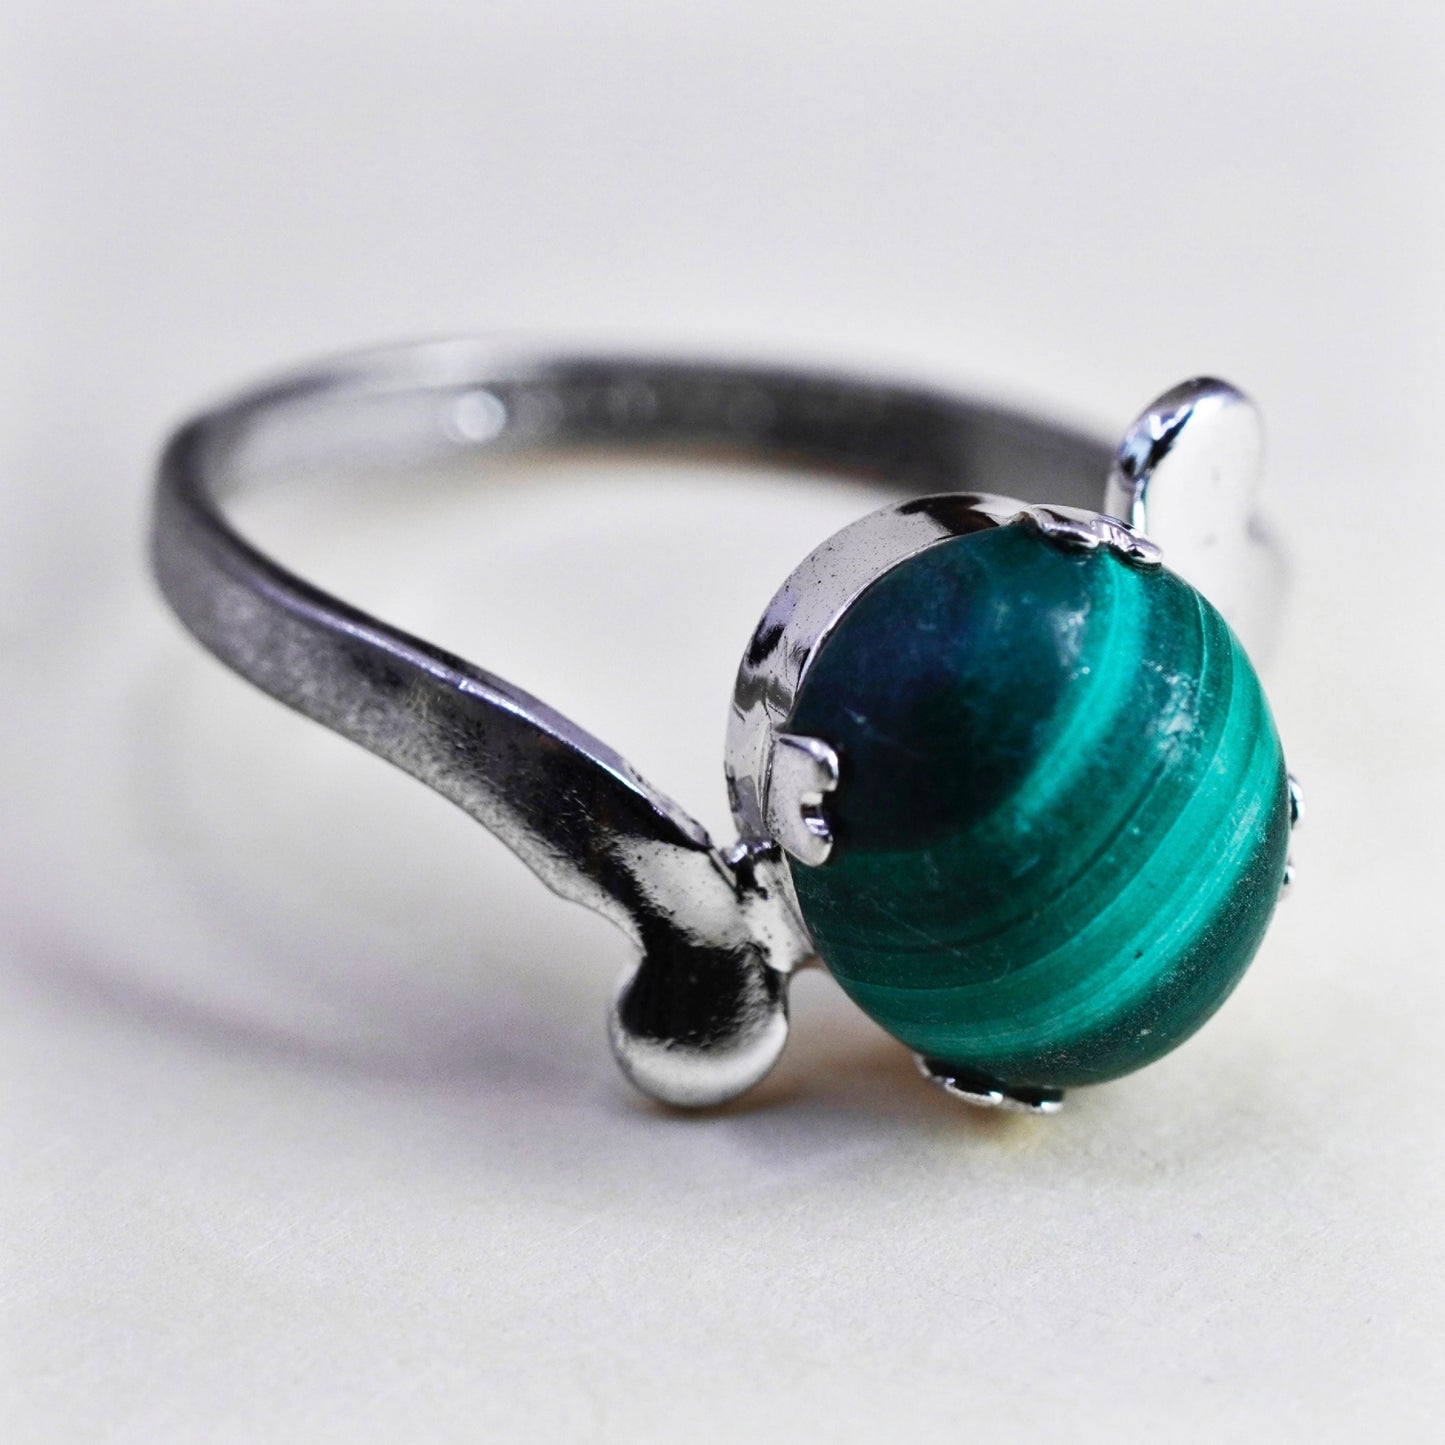 Size 6.5, southwestern Sterling 925 silver handmade ring with malachite